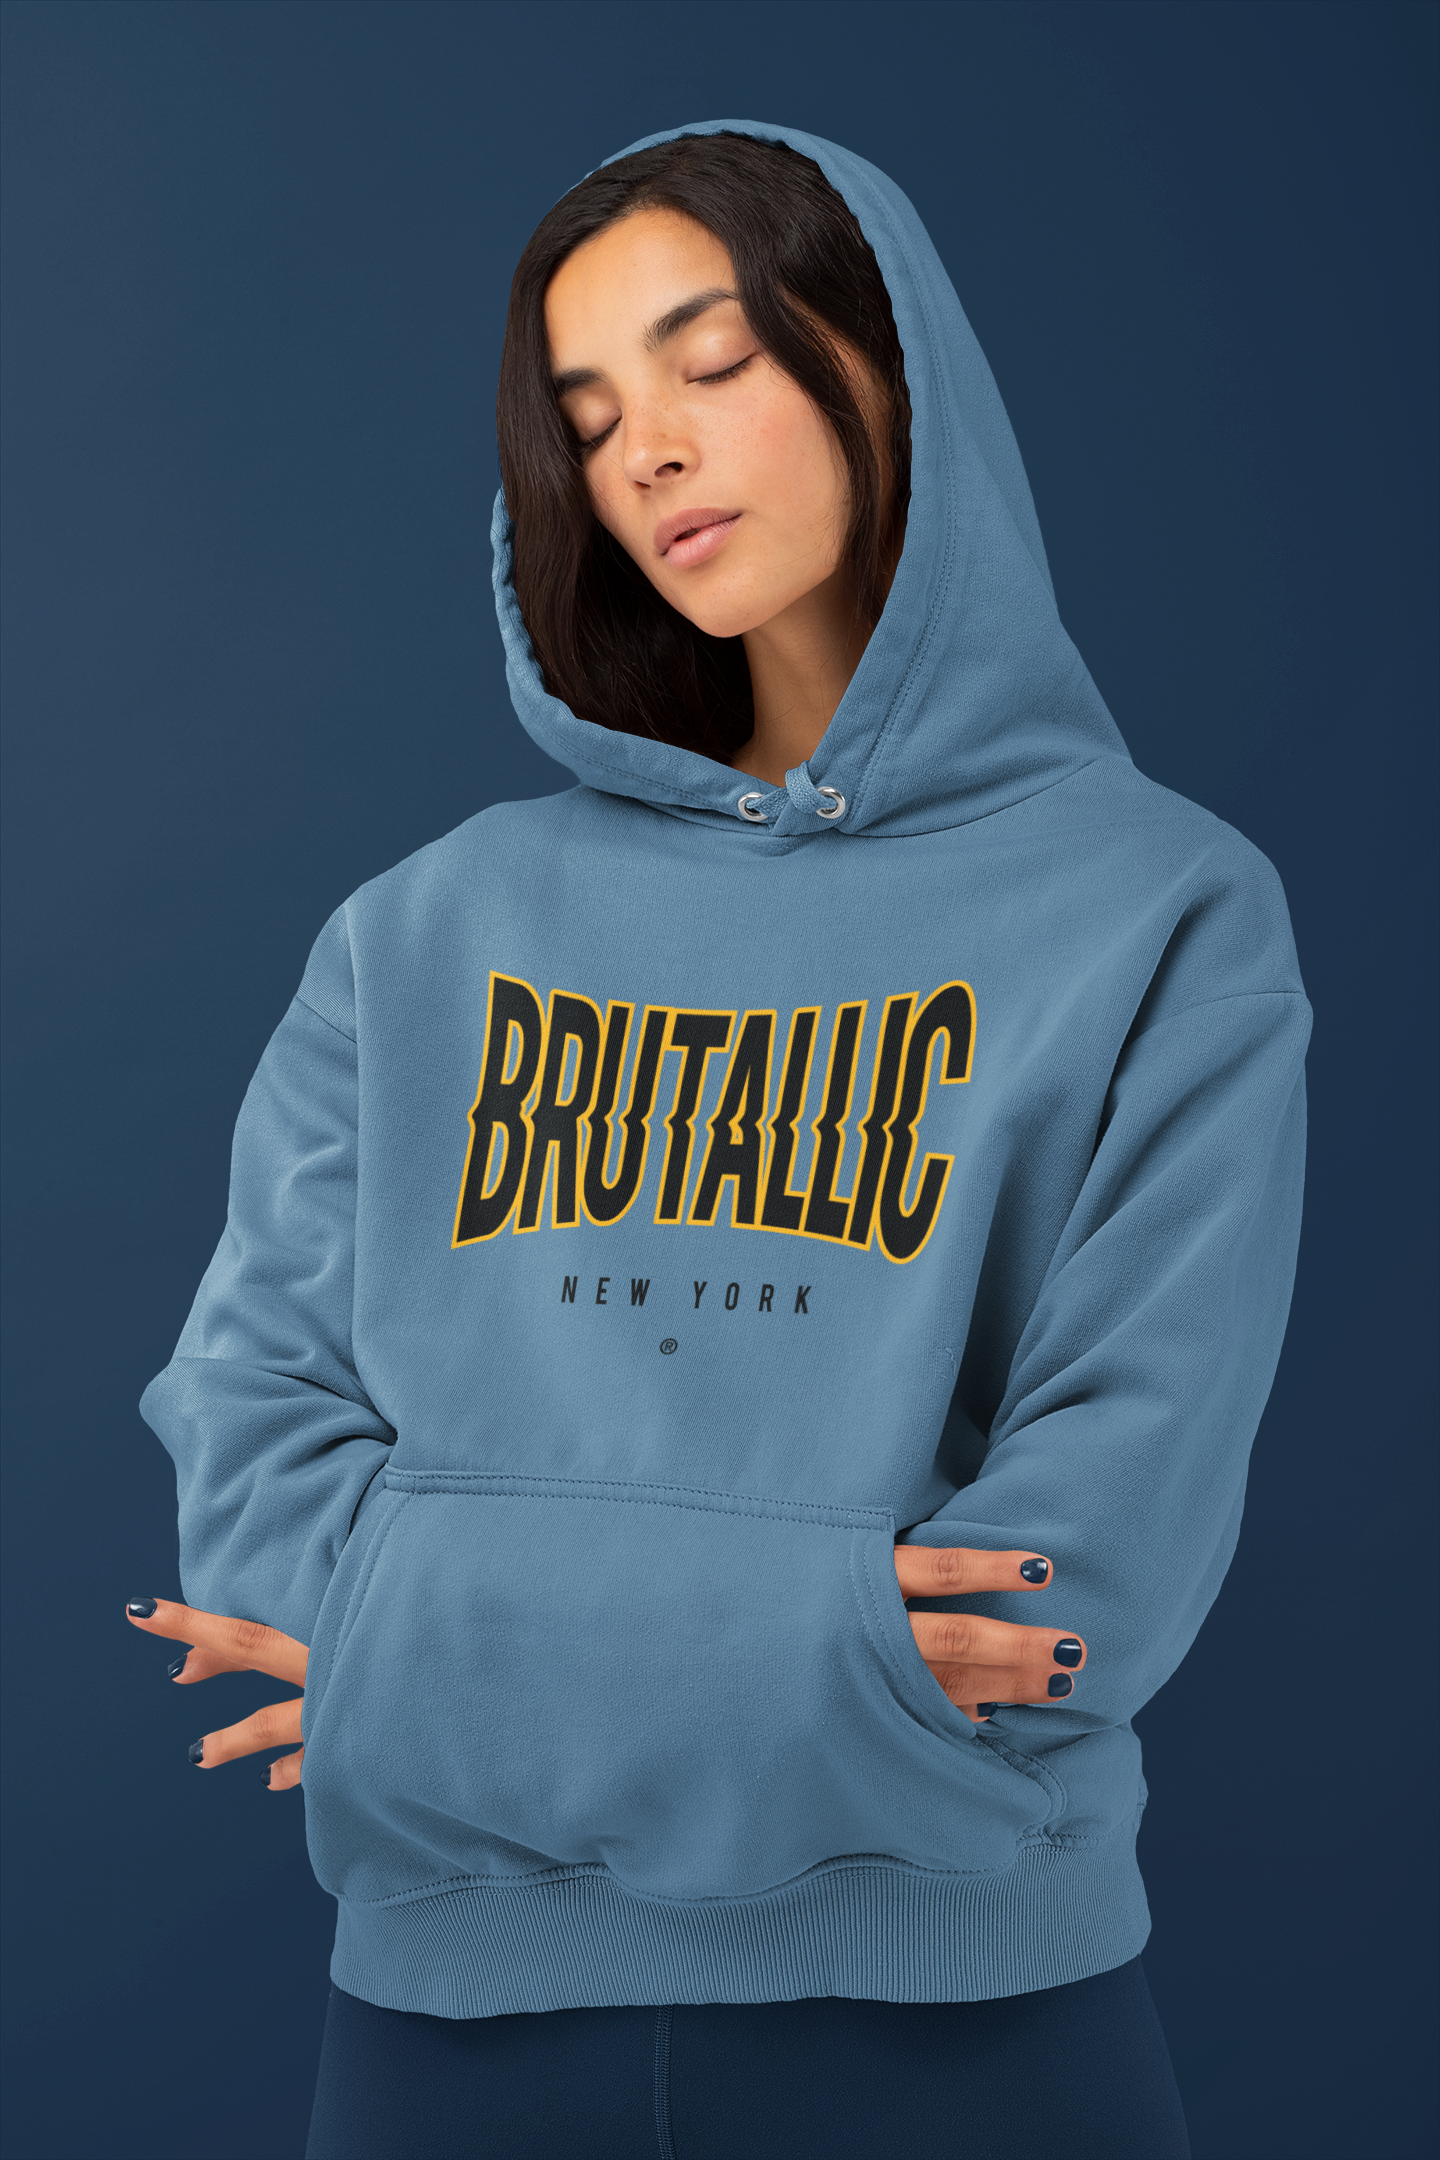 Indigo blue hoodie with disrupted brutallic front logo, worn by female model with hands tucked inside front pouch pocket